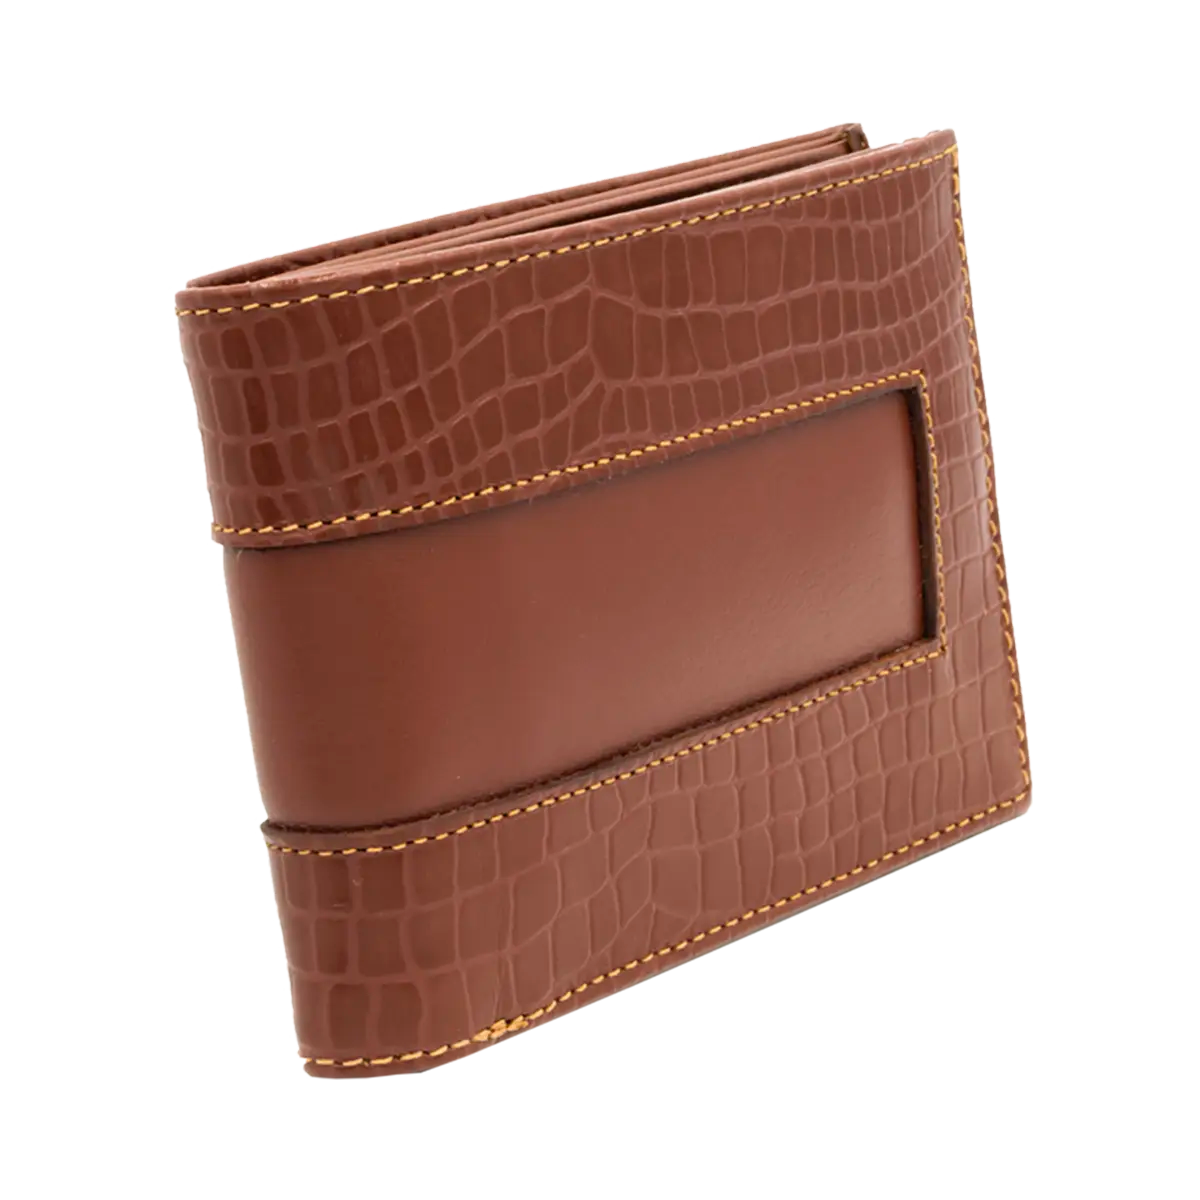 brown print leather wallet for men &amp; women. Fashion accessories, shop in San Diego, CA.